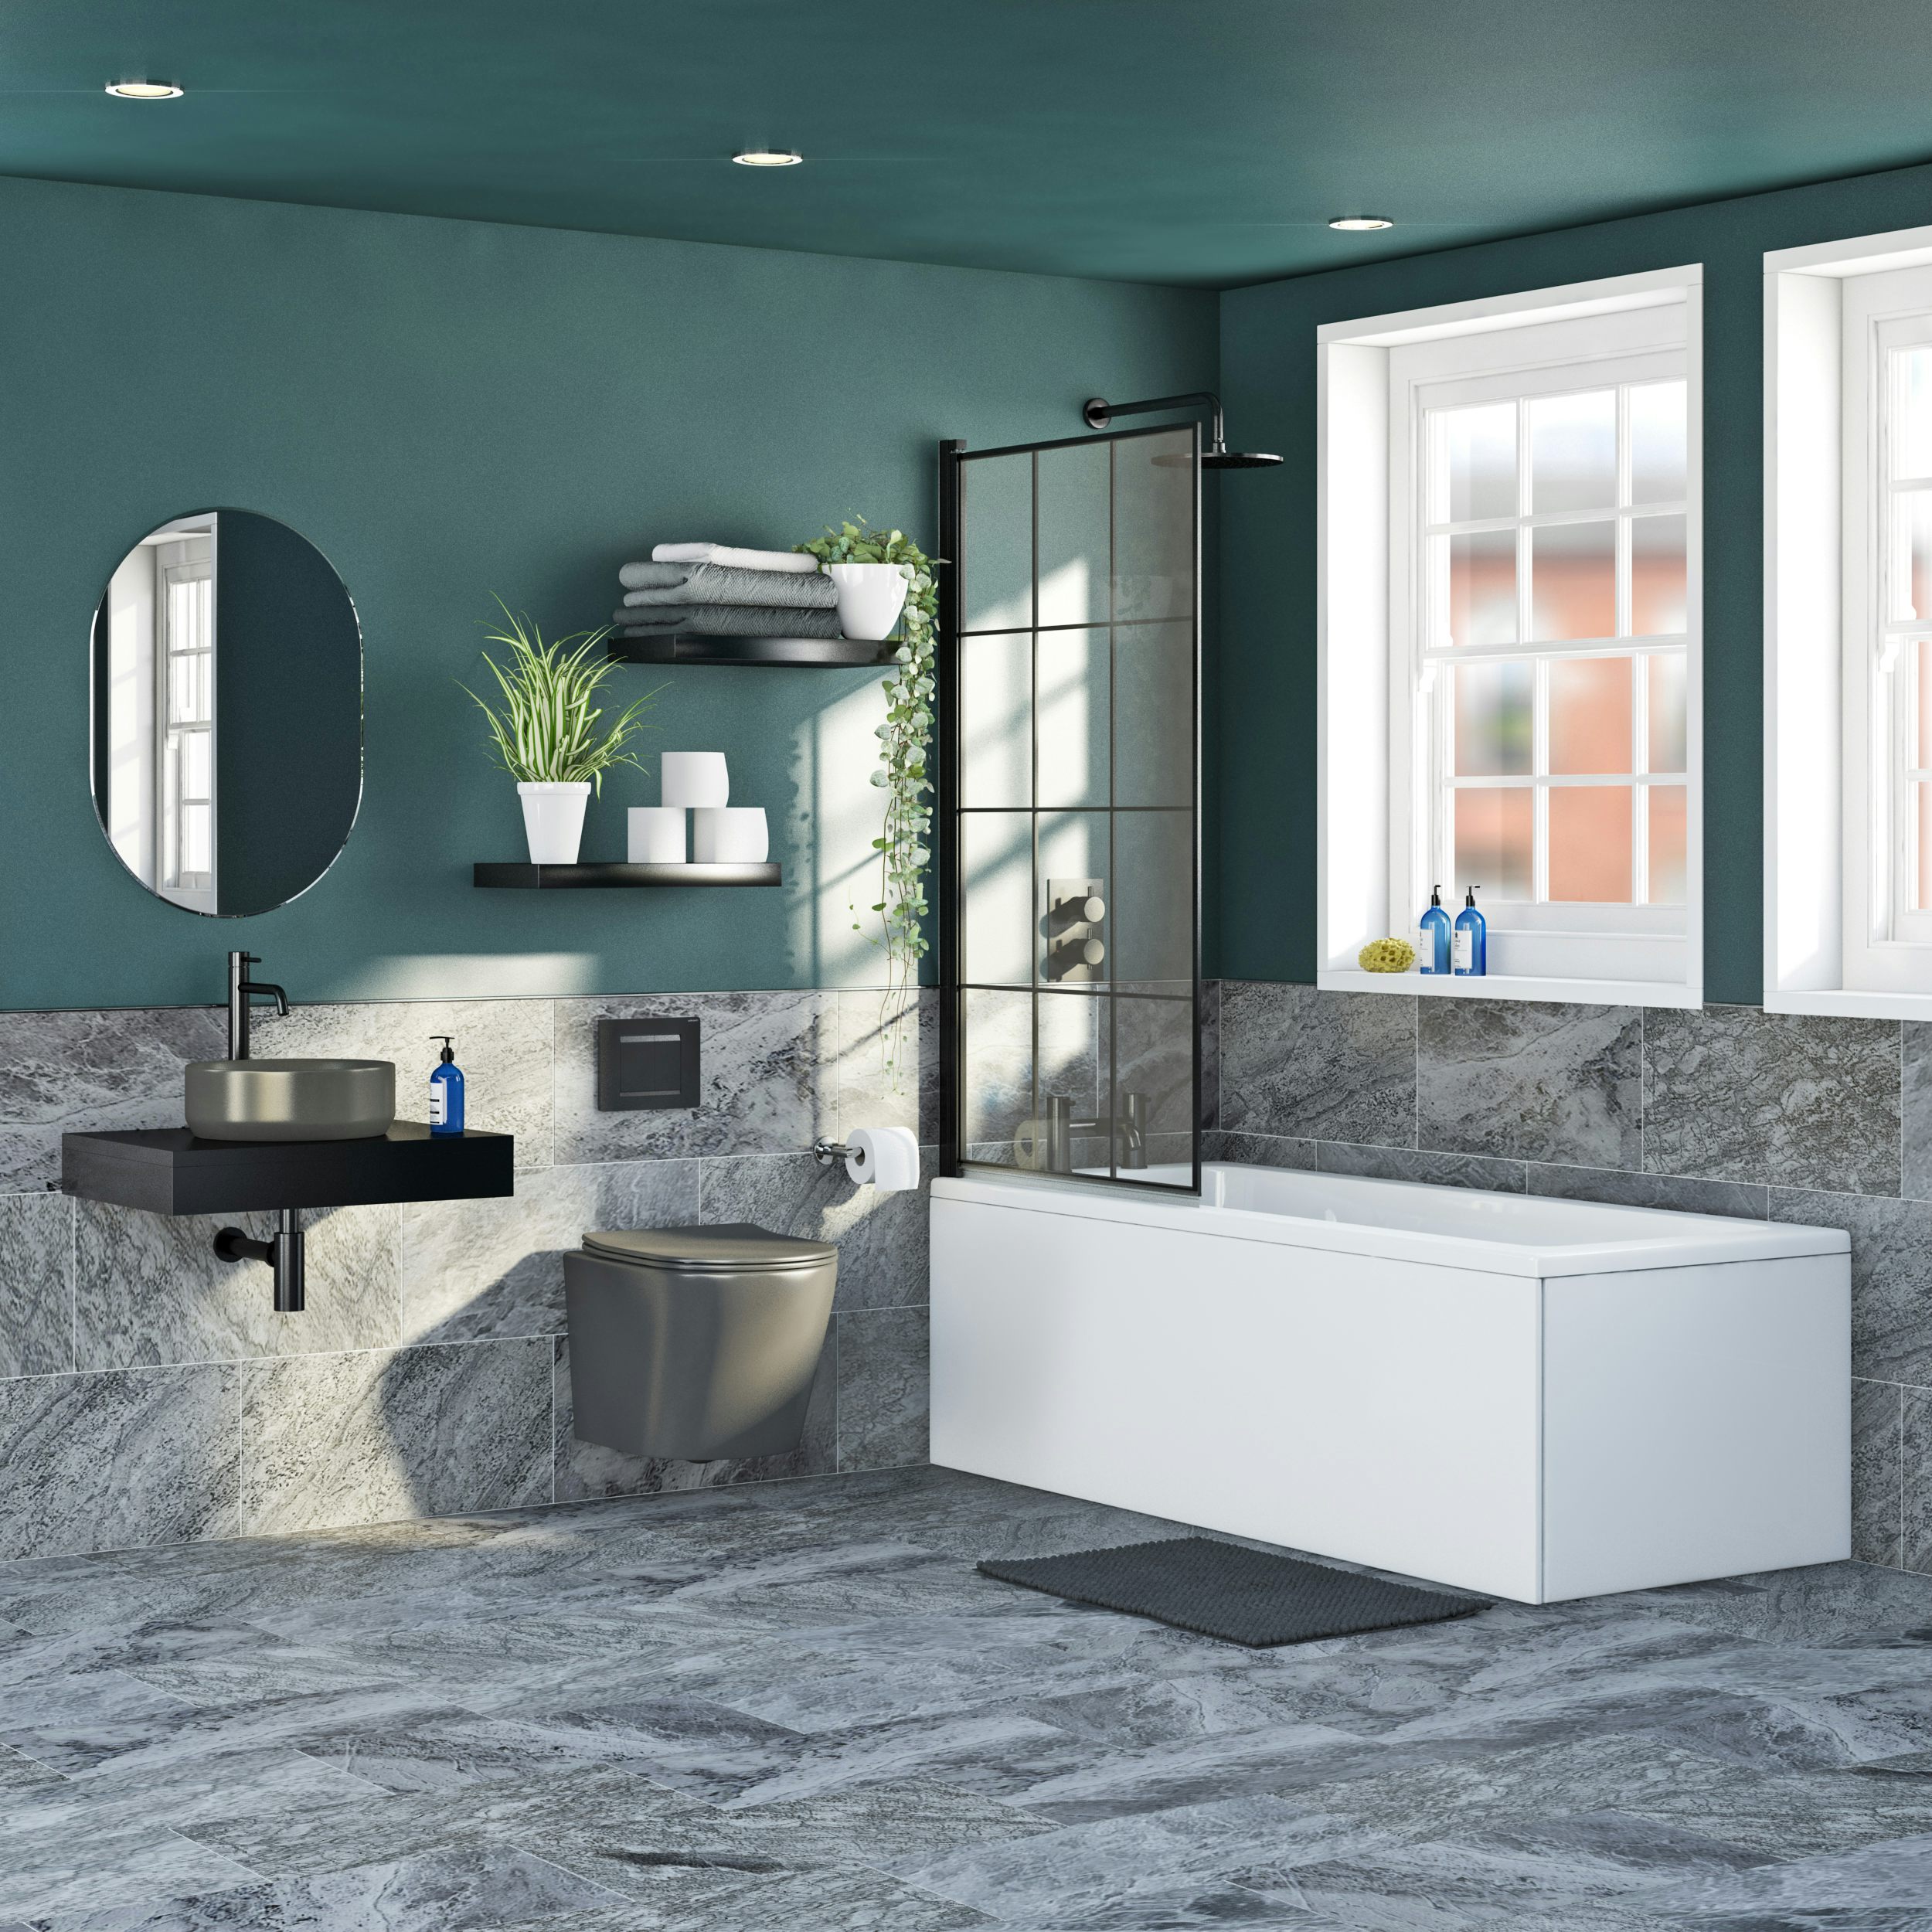 Mode Orion complete bathroom suite with contemporary charcoal grey wall hung toilet and straight shower bath